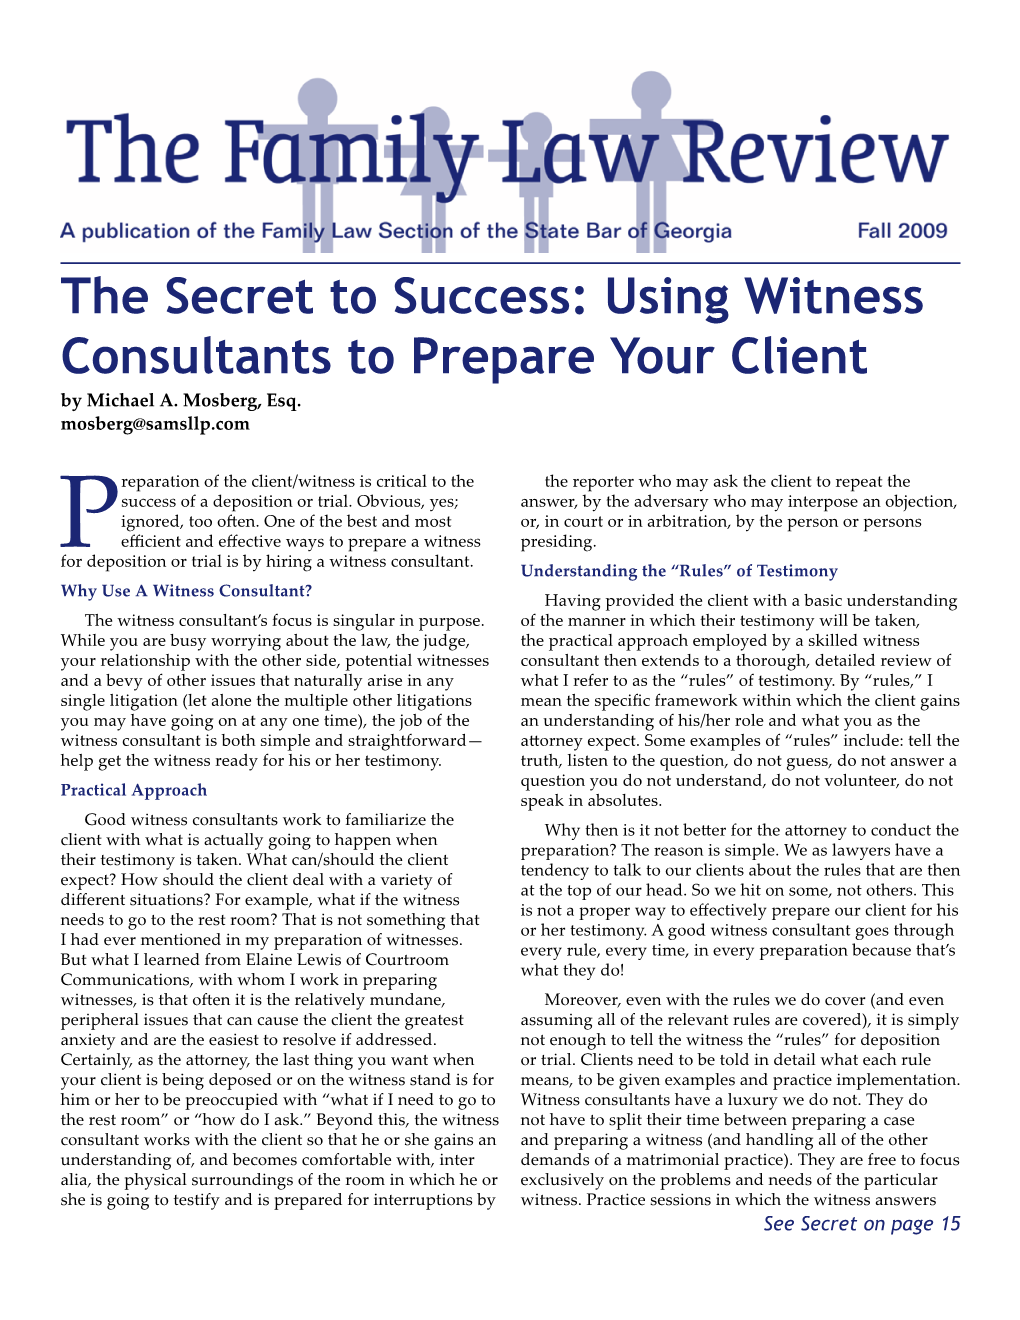 The Secret to Success: Using Witness Consultants to Prepare Your Client by Michael A